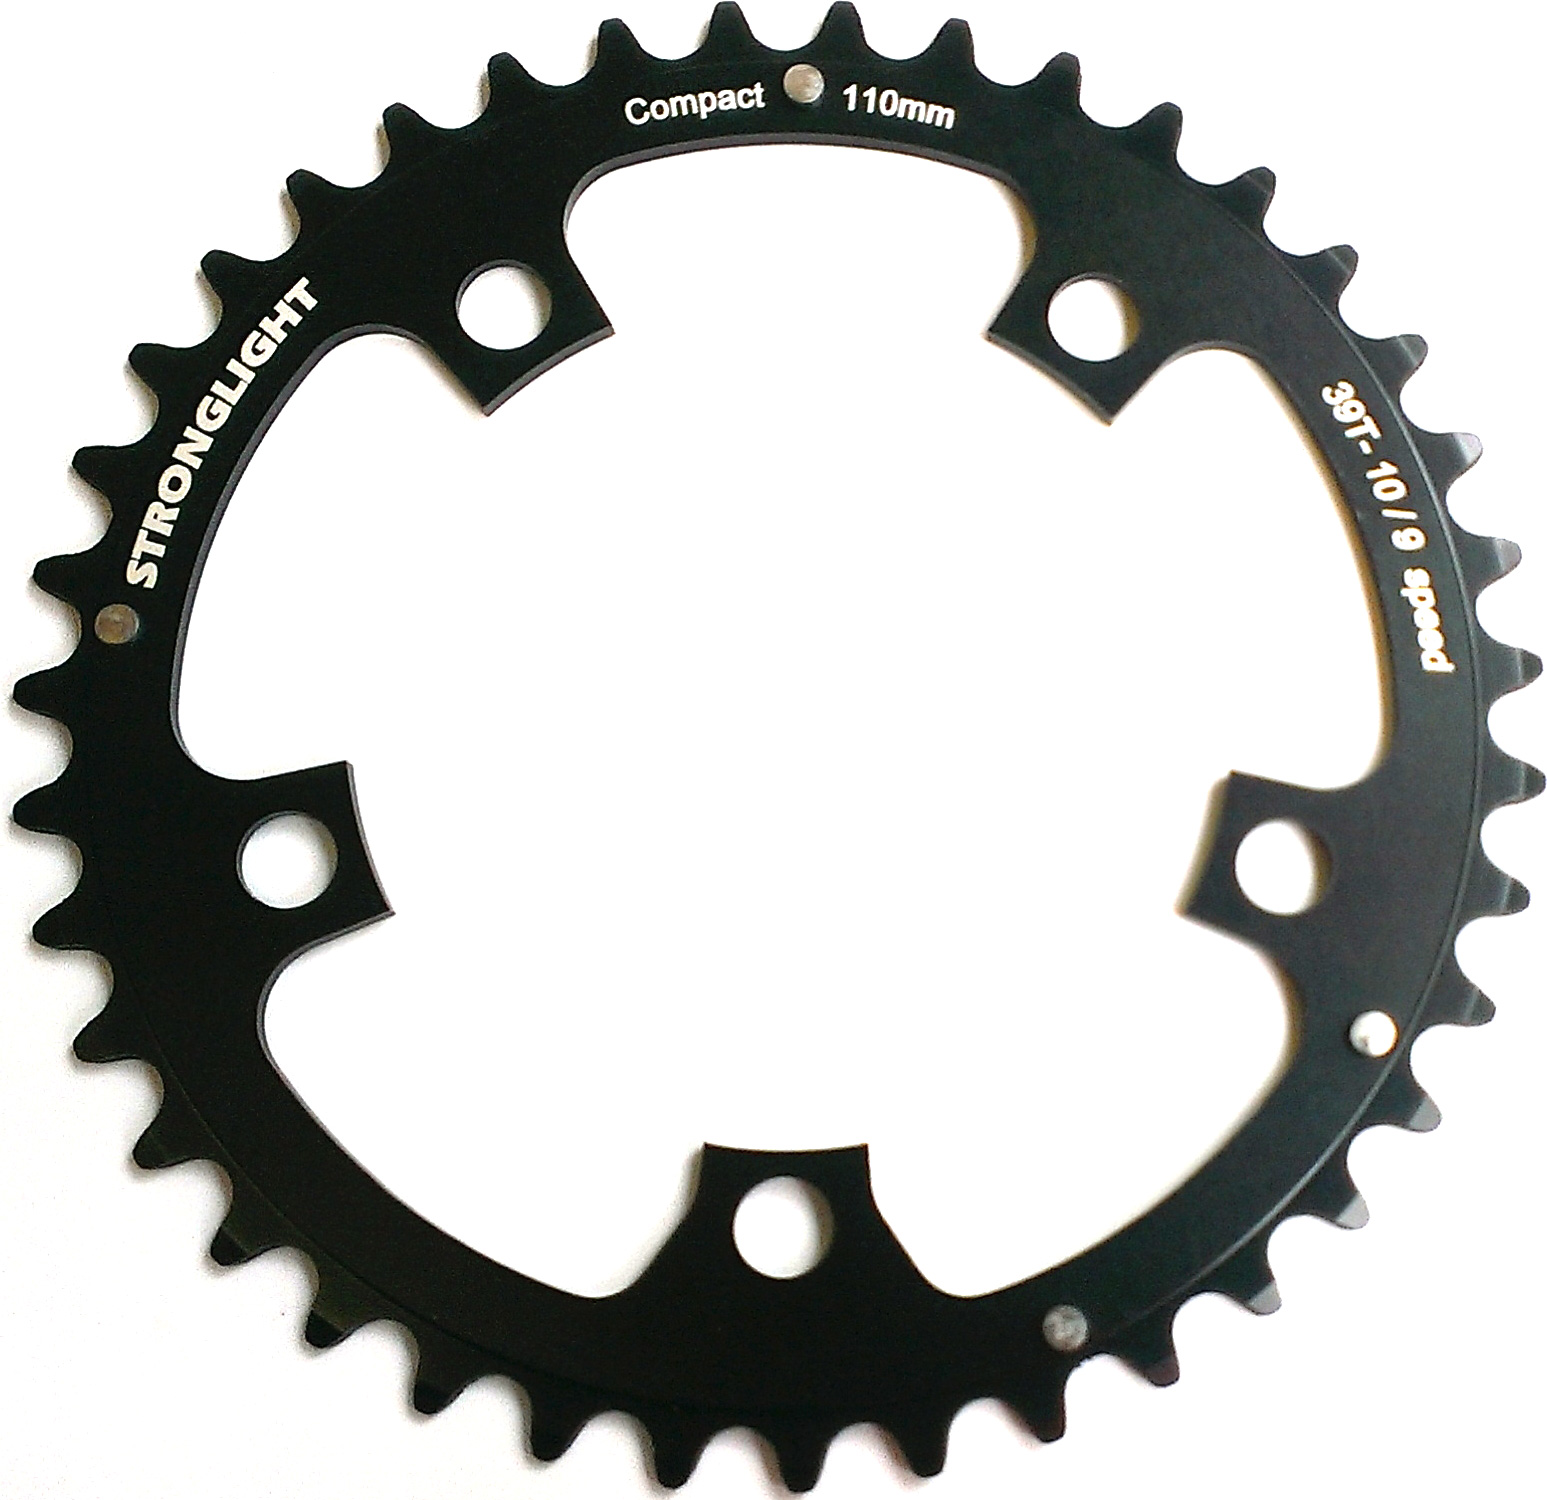 RD11050Z Stronglight 50T Black 5-Arm/110mm Chainring